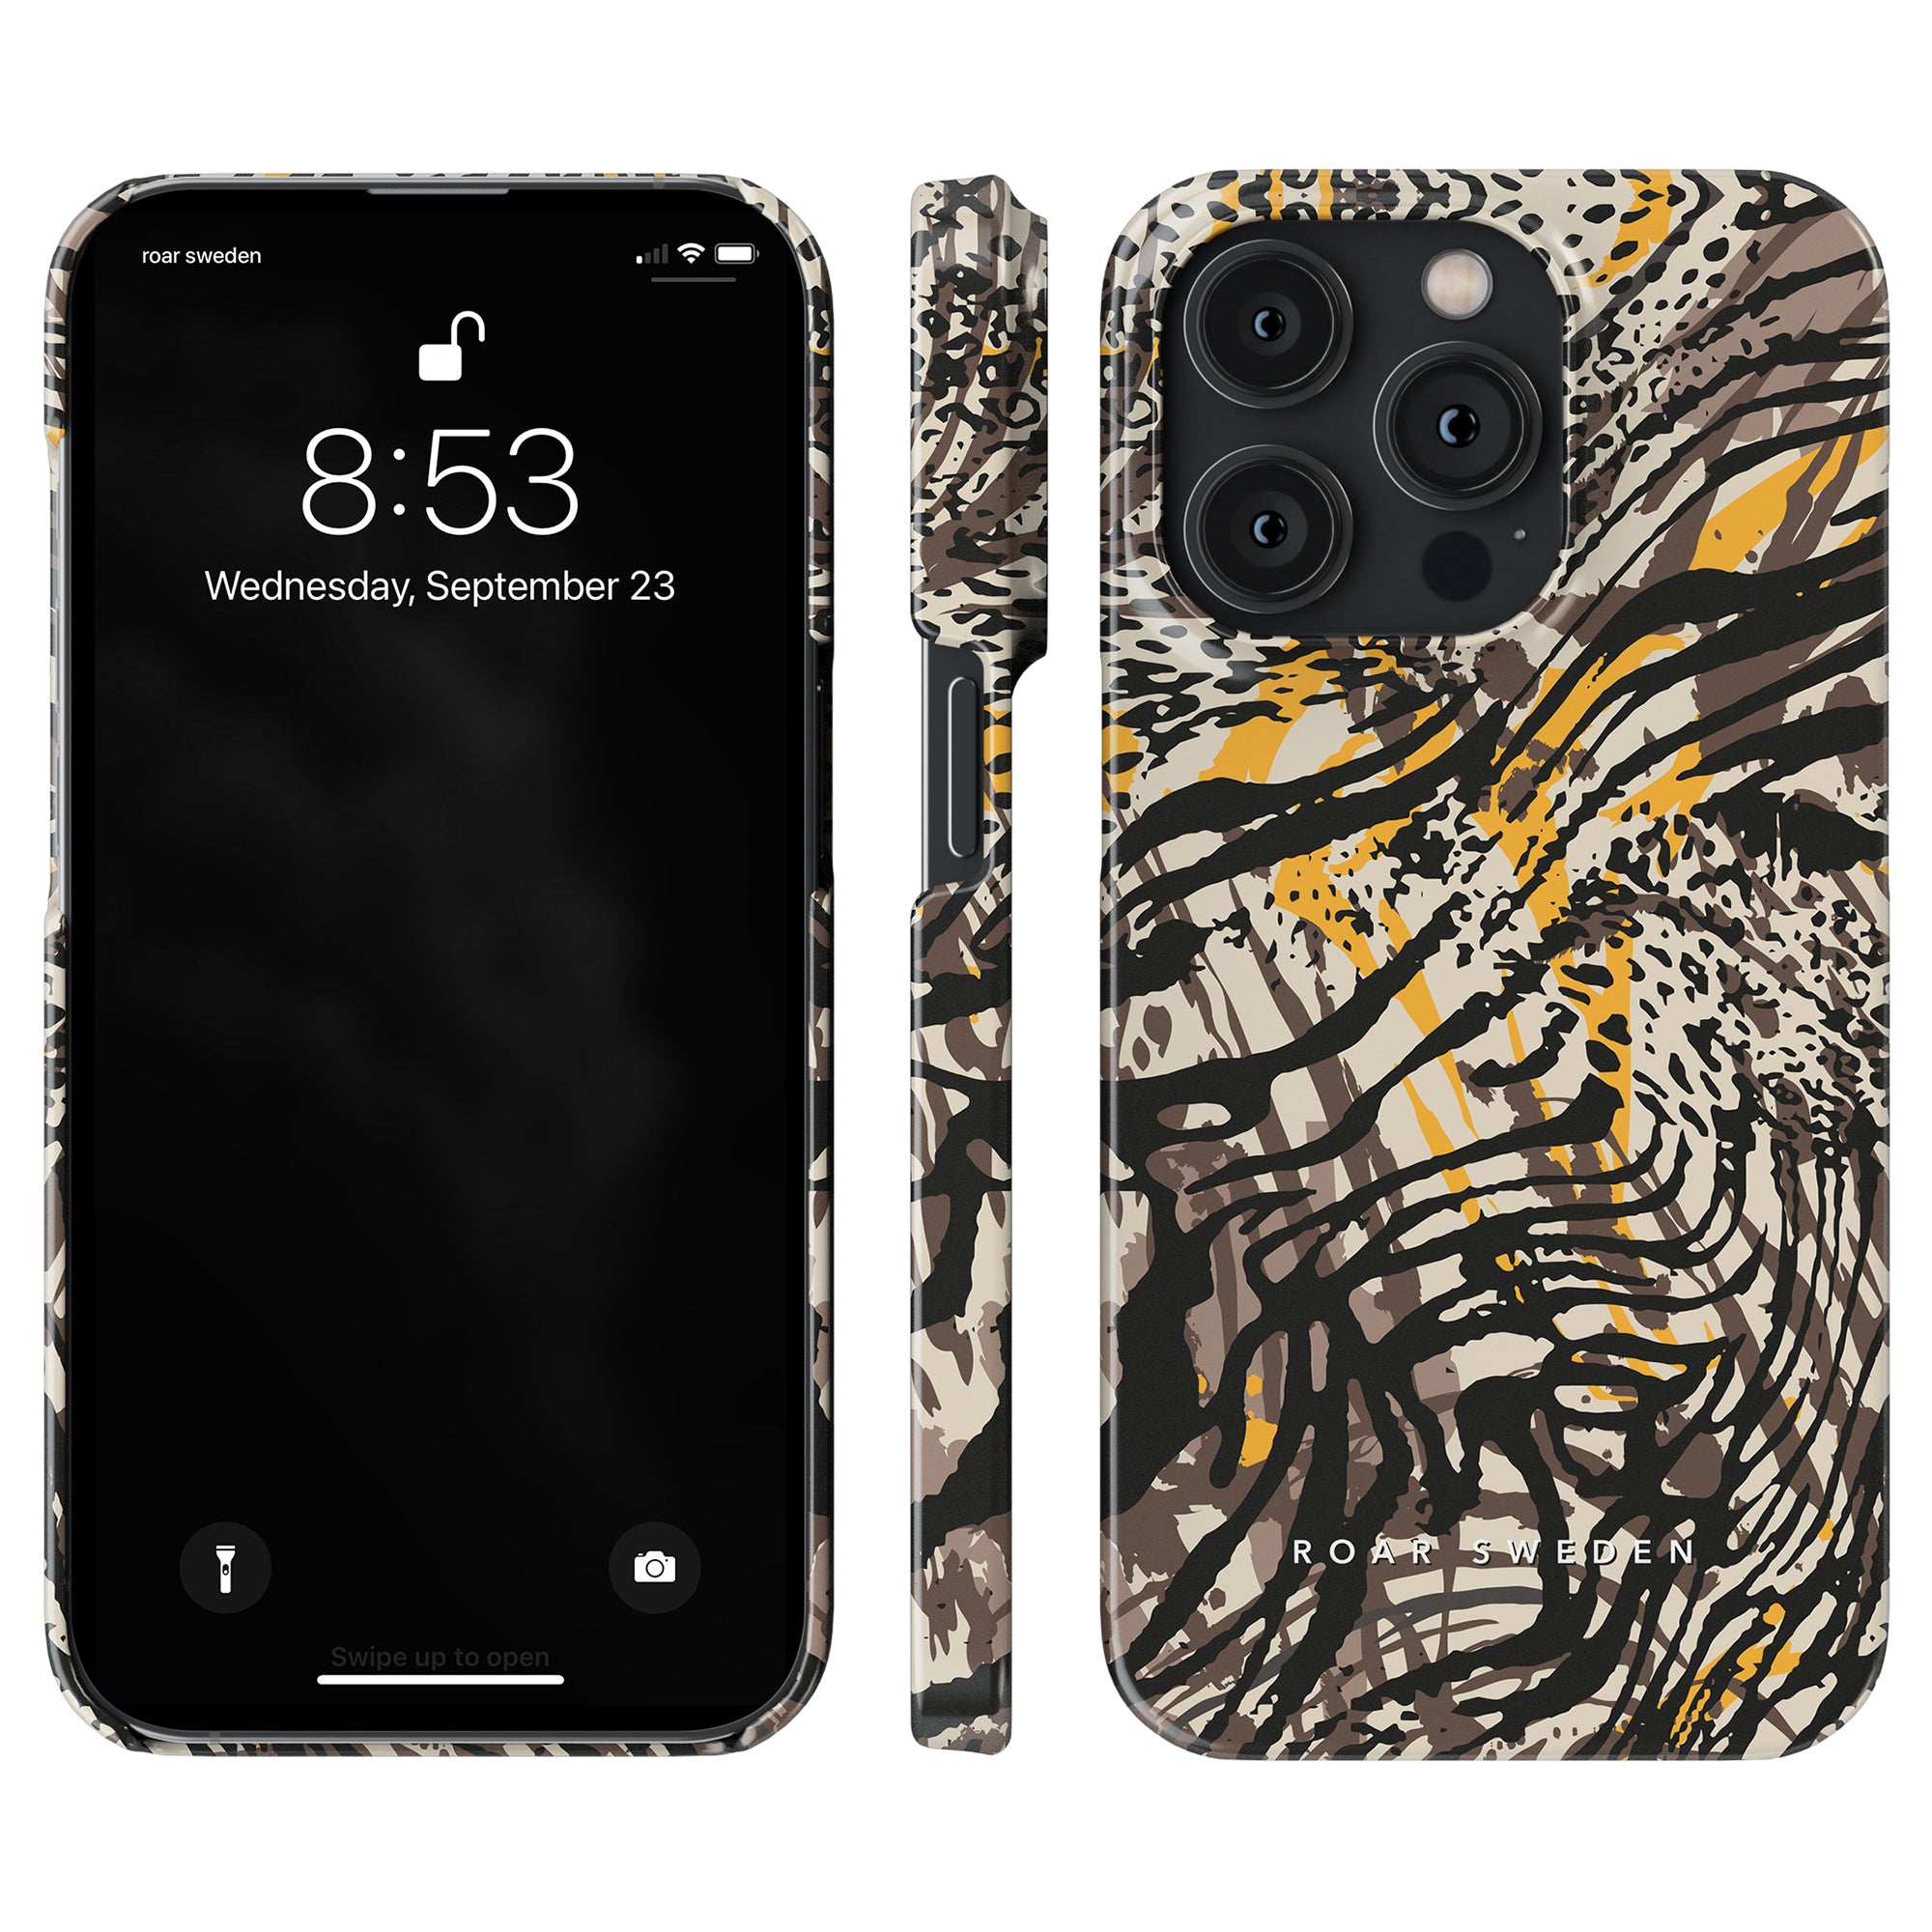 An explosive design on a Savage - Slim case, featuring a black and yellow pattern for your iPhone 11 Pro.